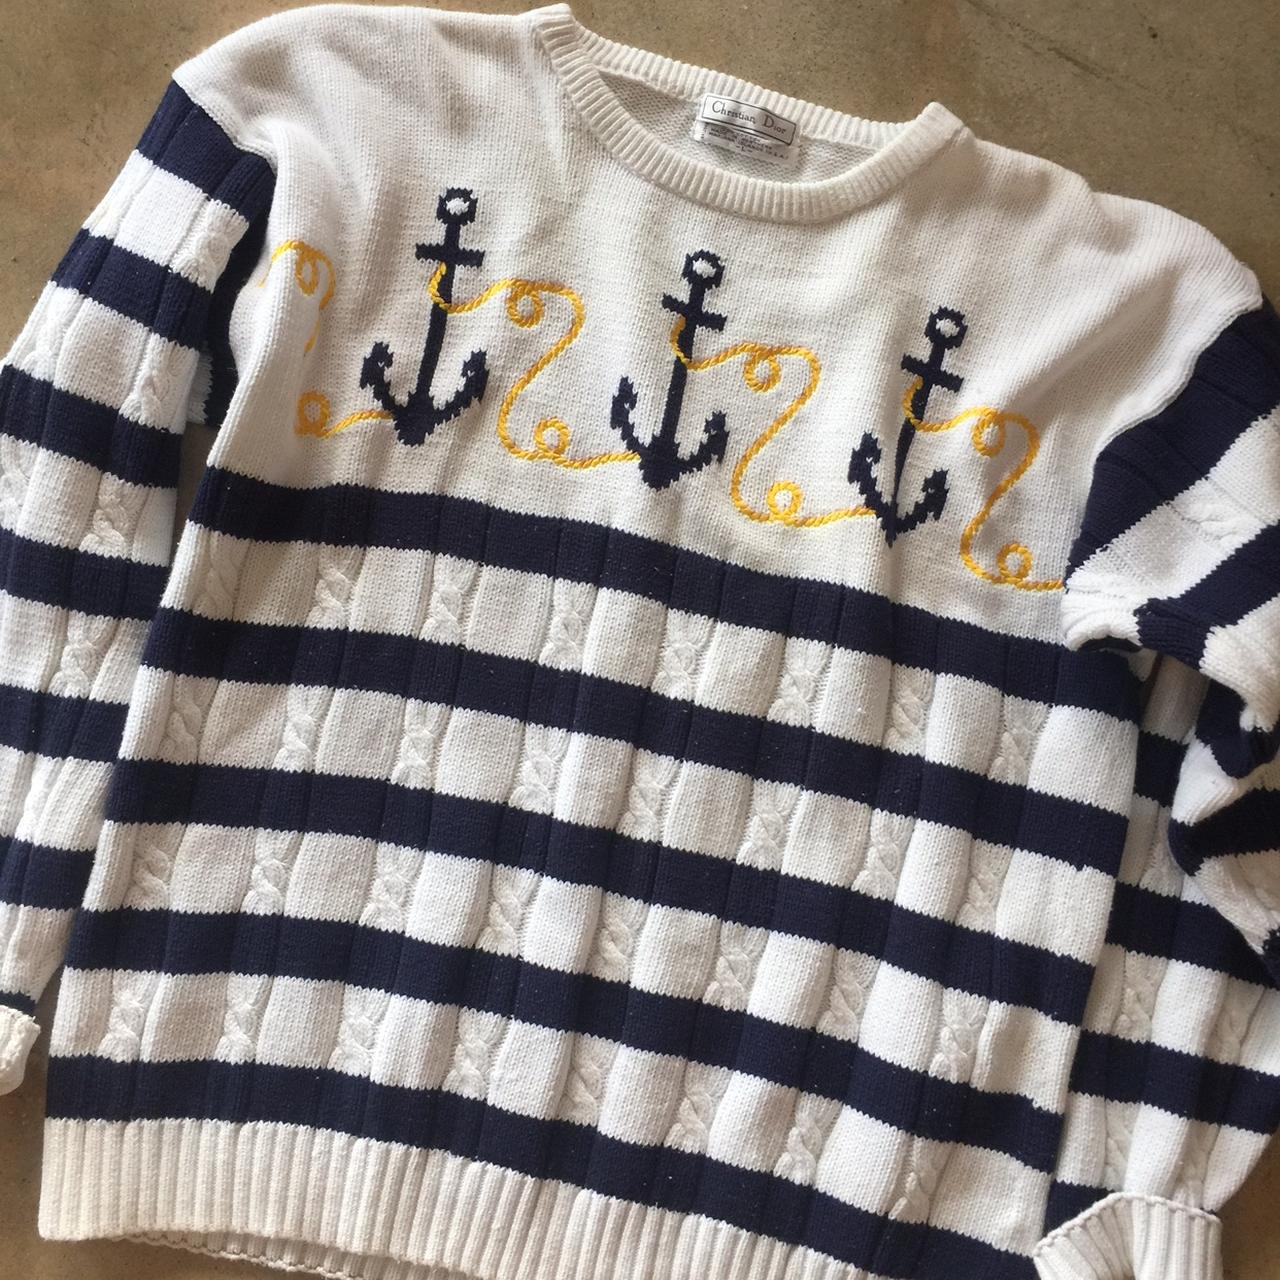 Anchors sweater Size M Hemingway Made in - Depop